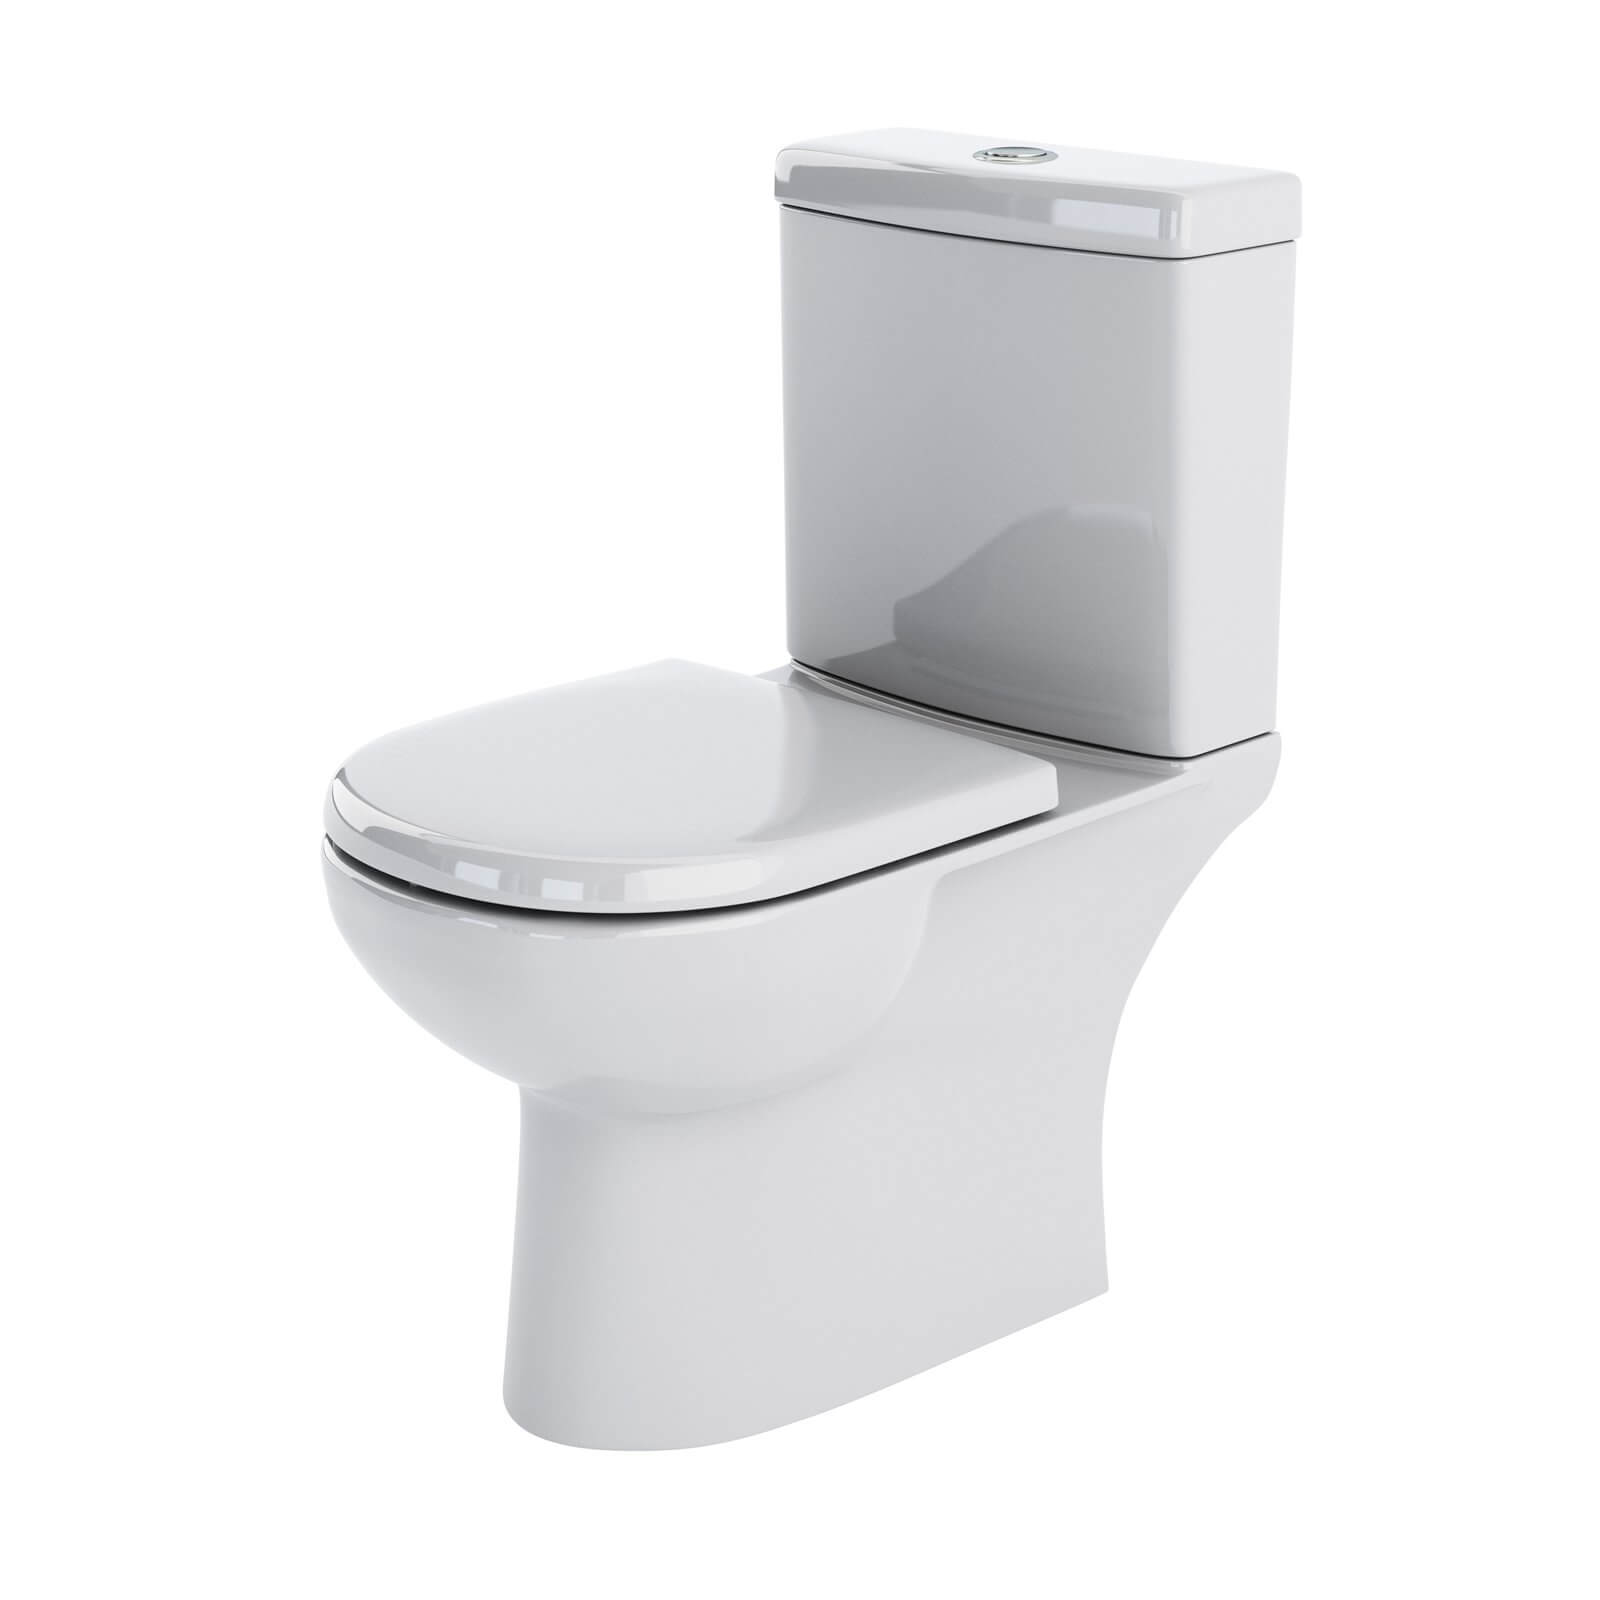 Balterley Ridley Pan, Cistern and Soft Close Toilet Seat